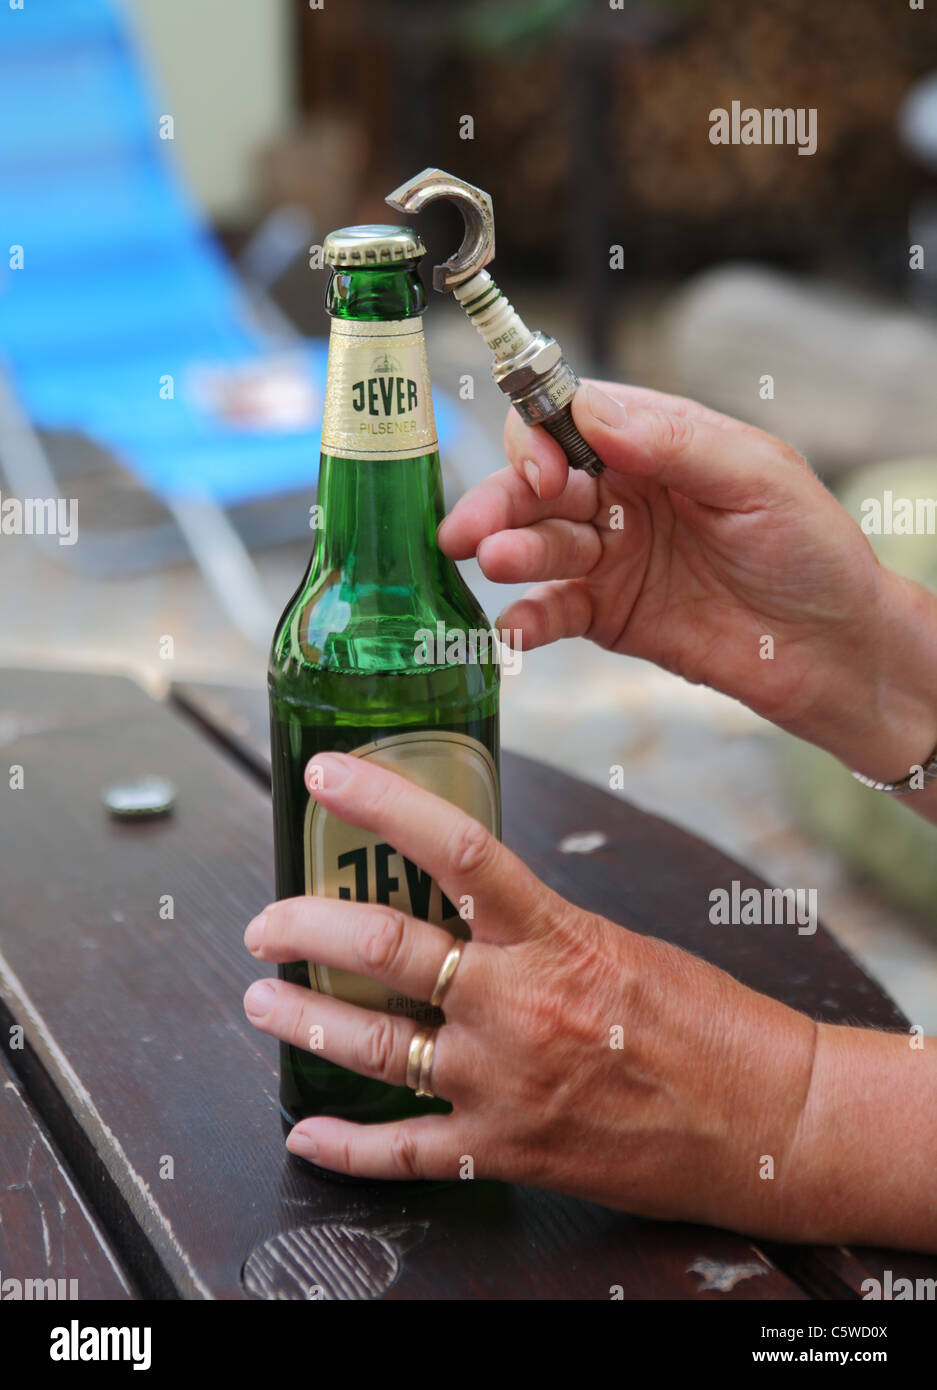 Opening a bottle of German Jever beer using a novelty bottle opener based upon a spark plug Stock Photo